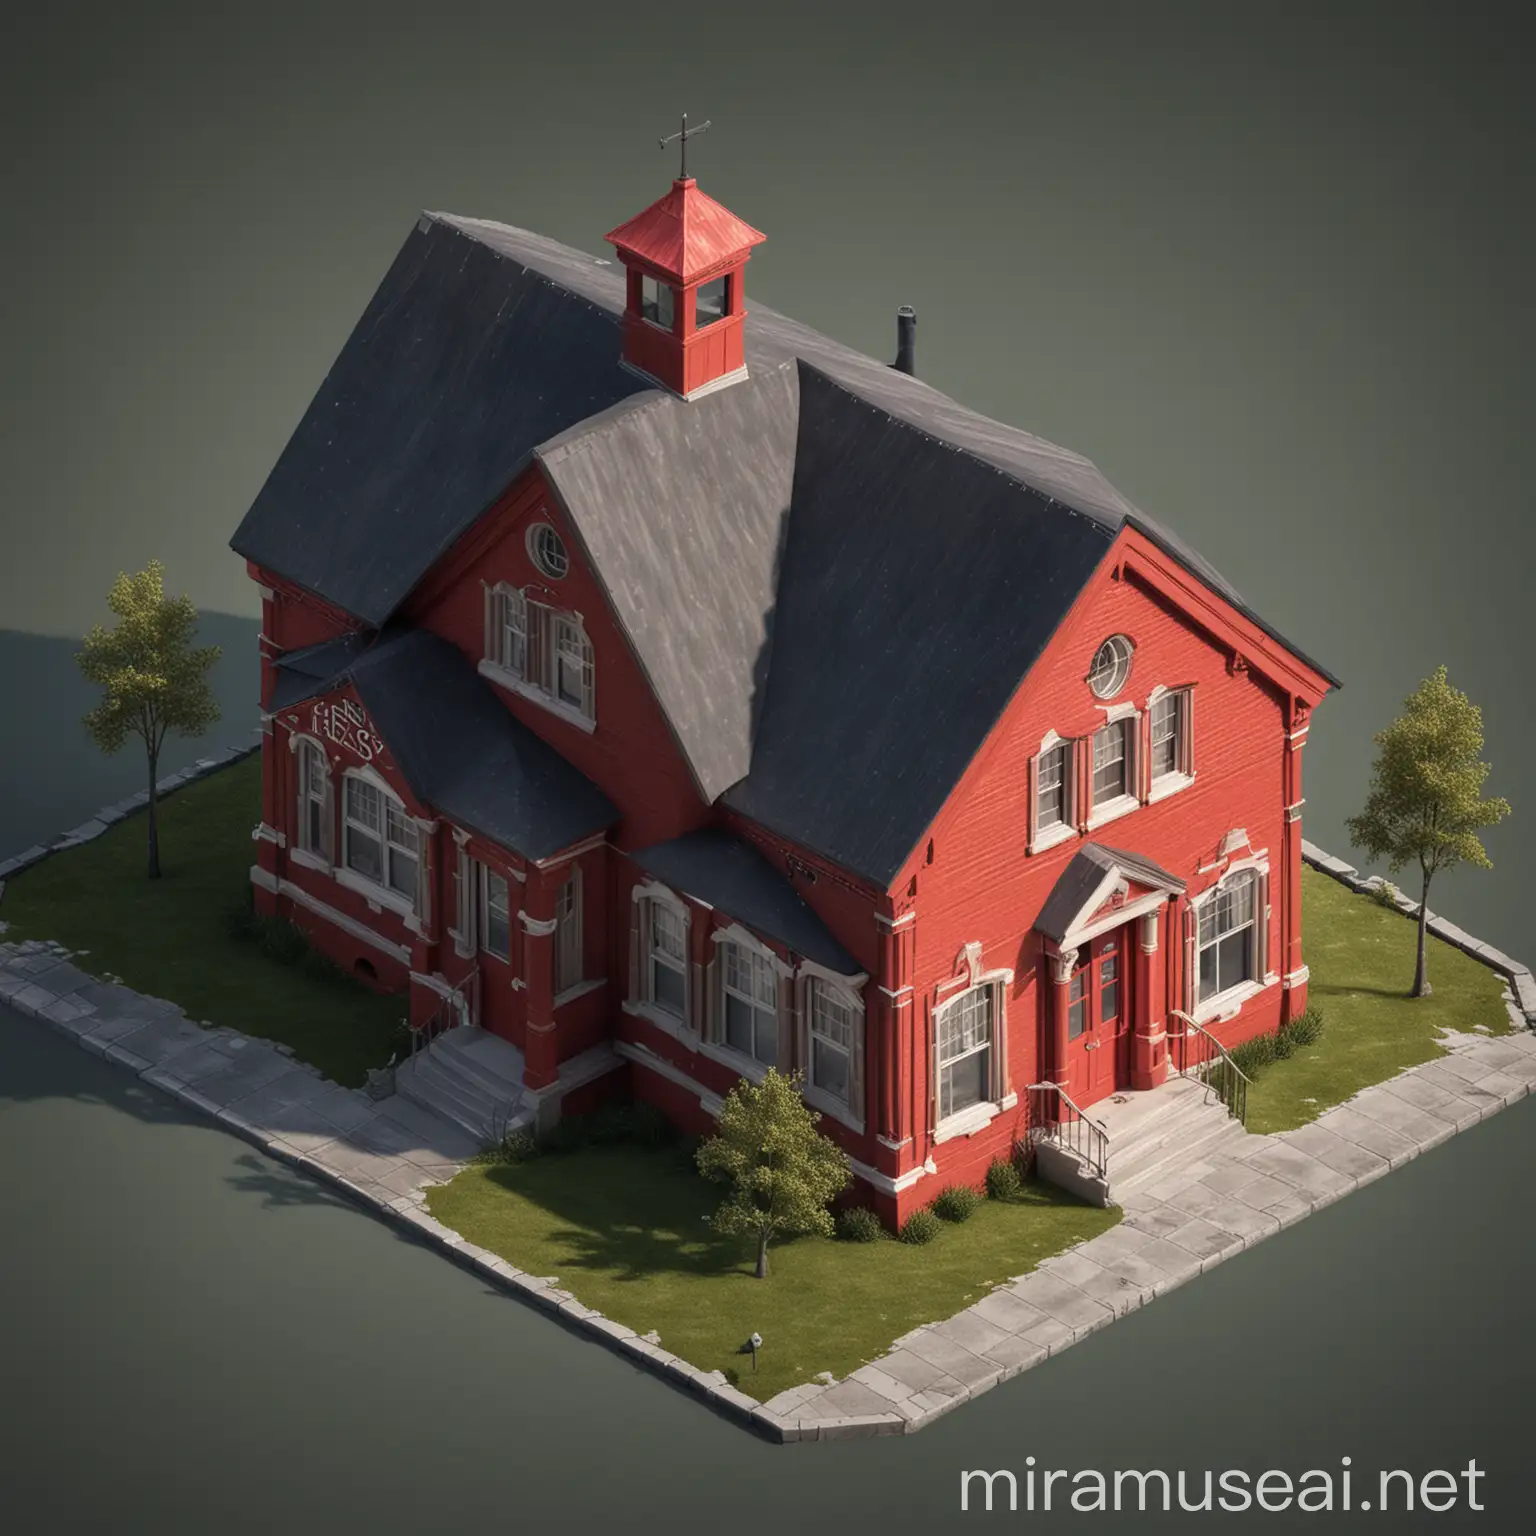 Realistic Red School House with AFrame Entrance in Isometric Perspective